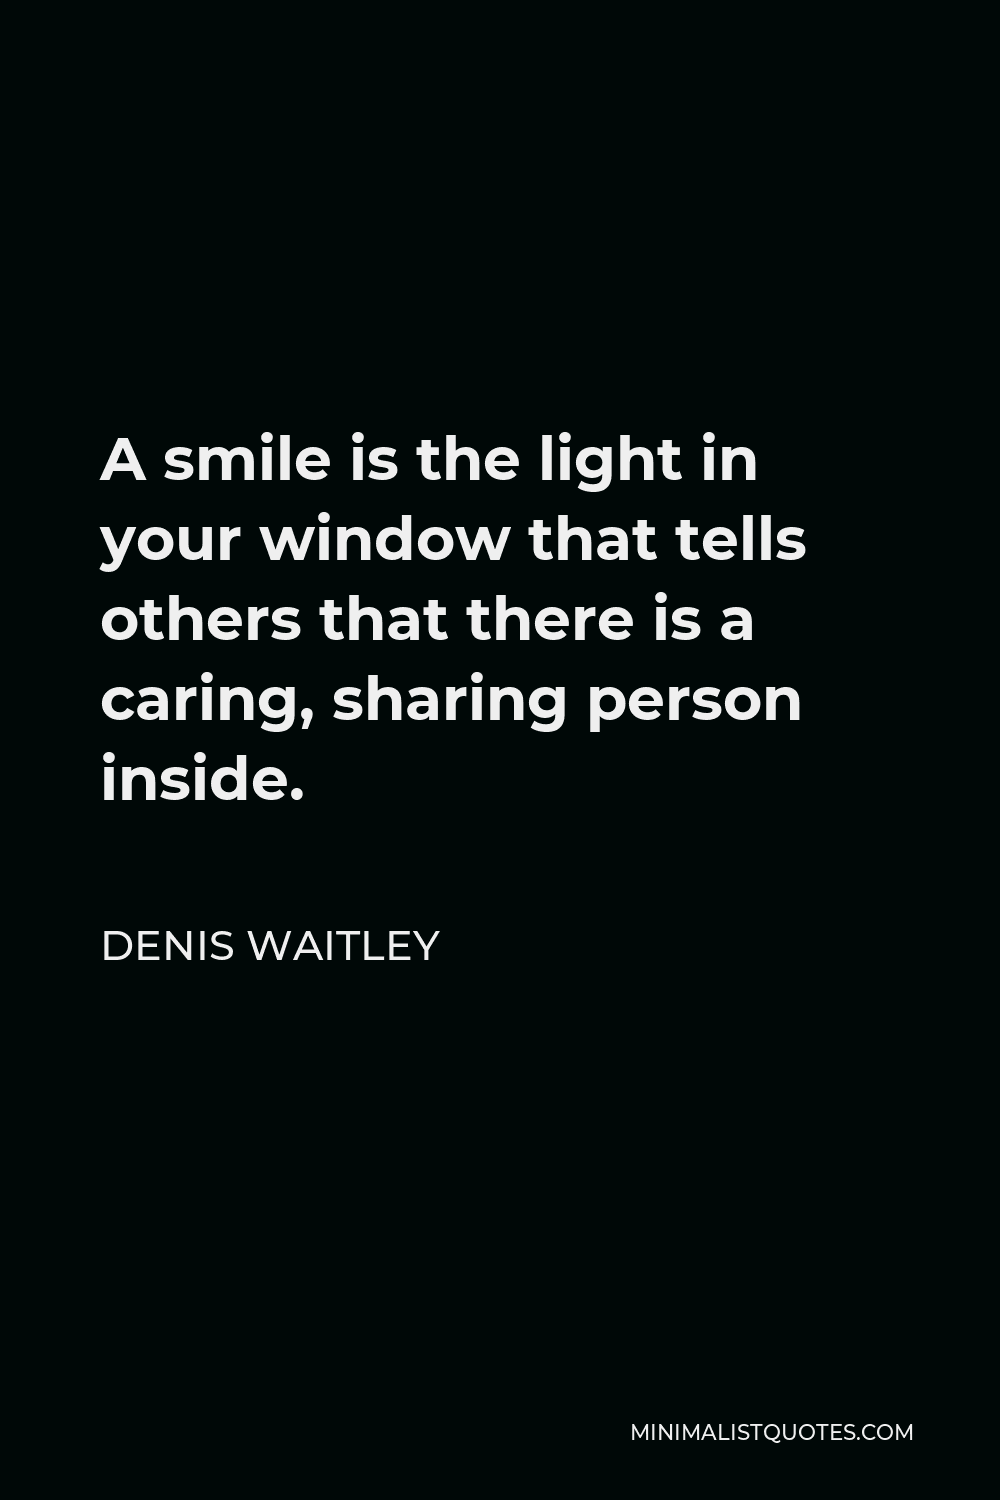 Denis Waitley Quote - A smile is the light in your window that tells others that there is a caring, sharing person inside.